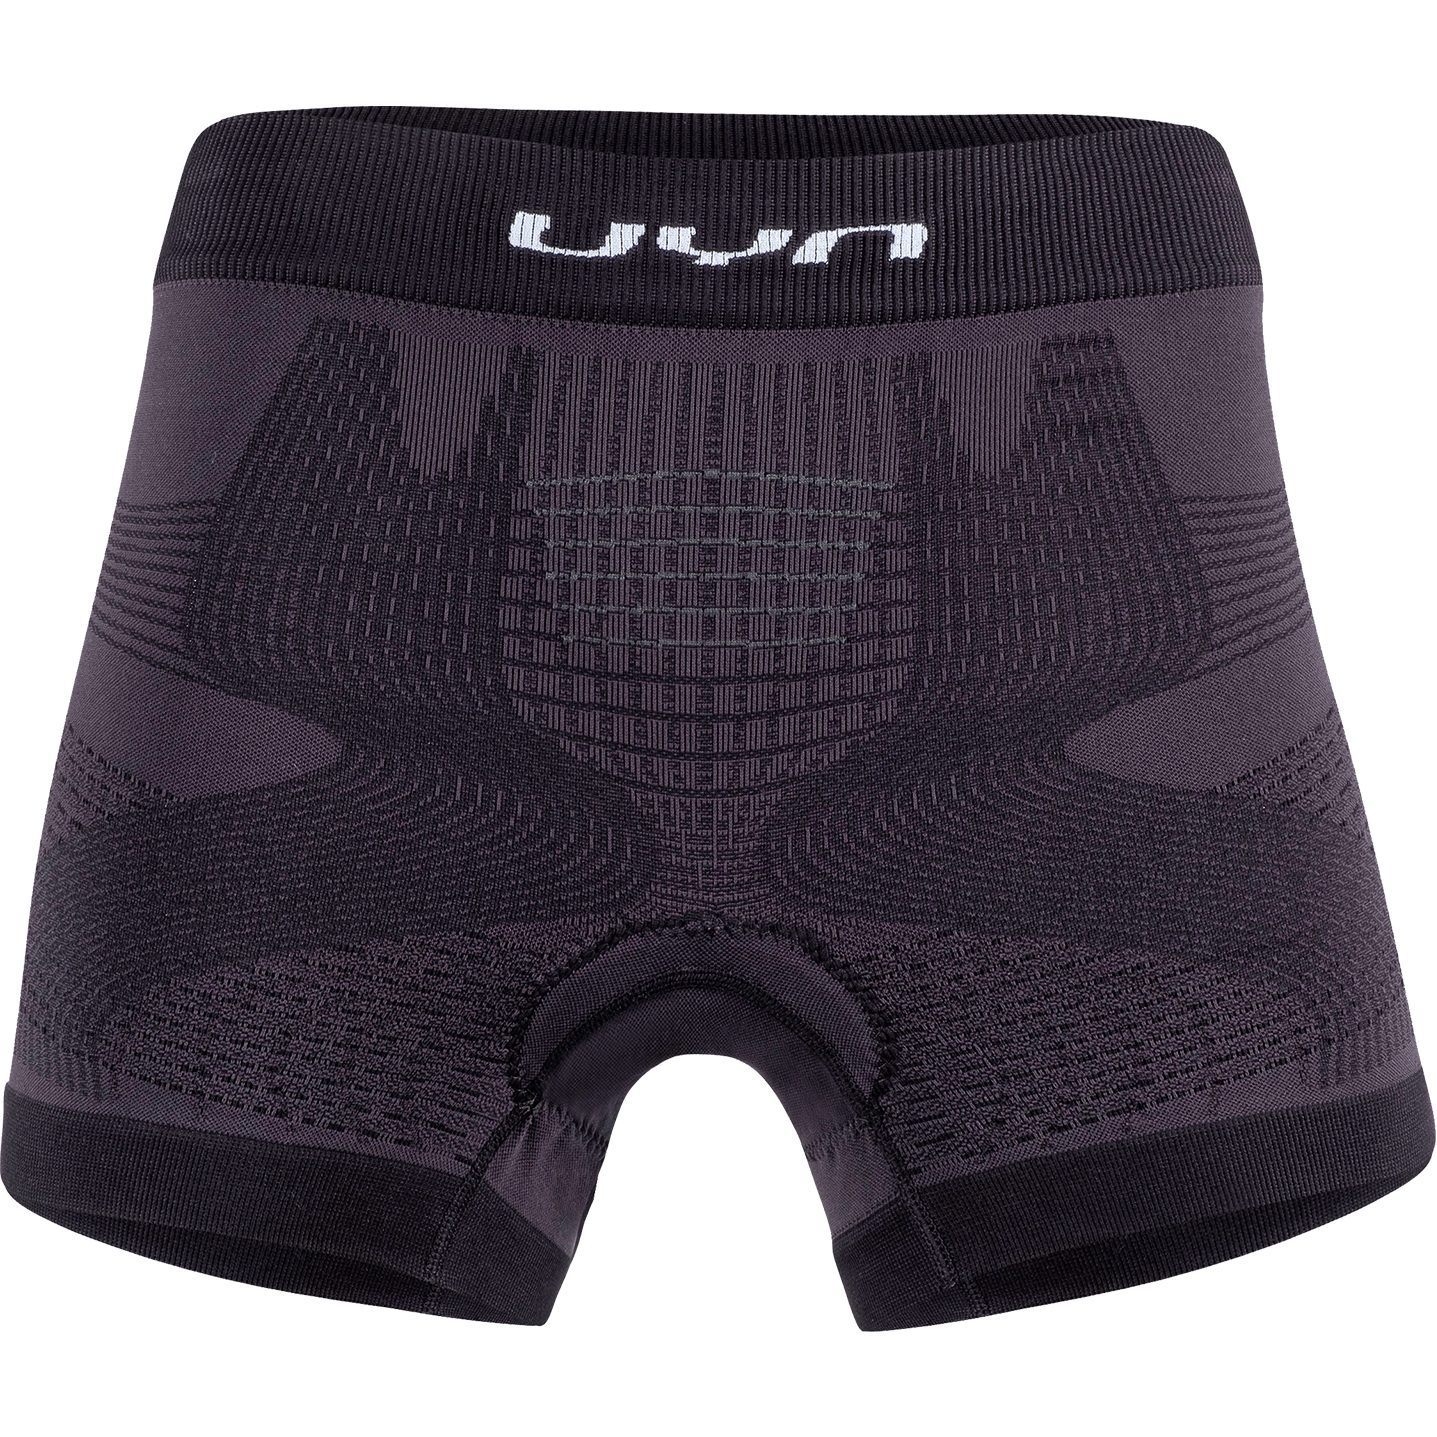 Picture of UYN Motyon 2.0 Boxer Shorts with Pad Women - Black Board/White